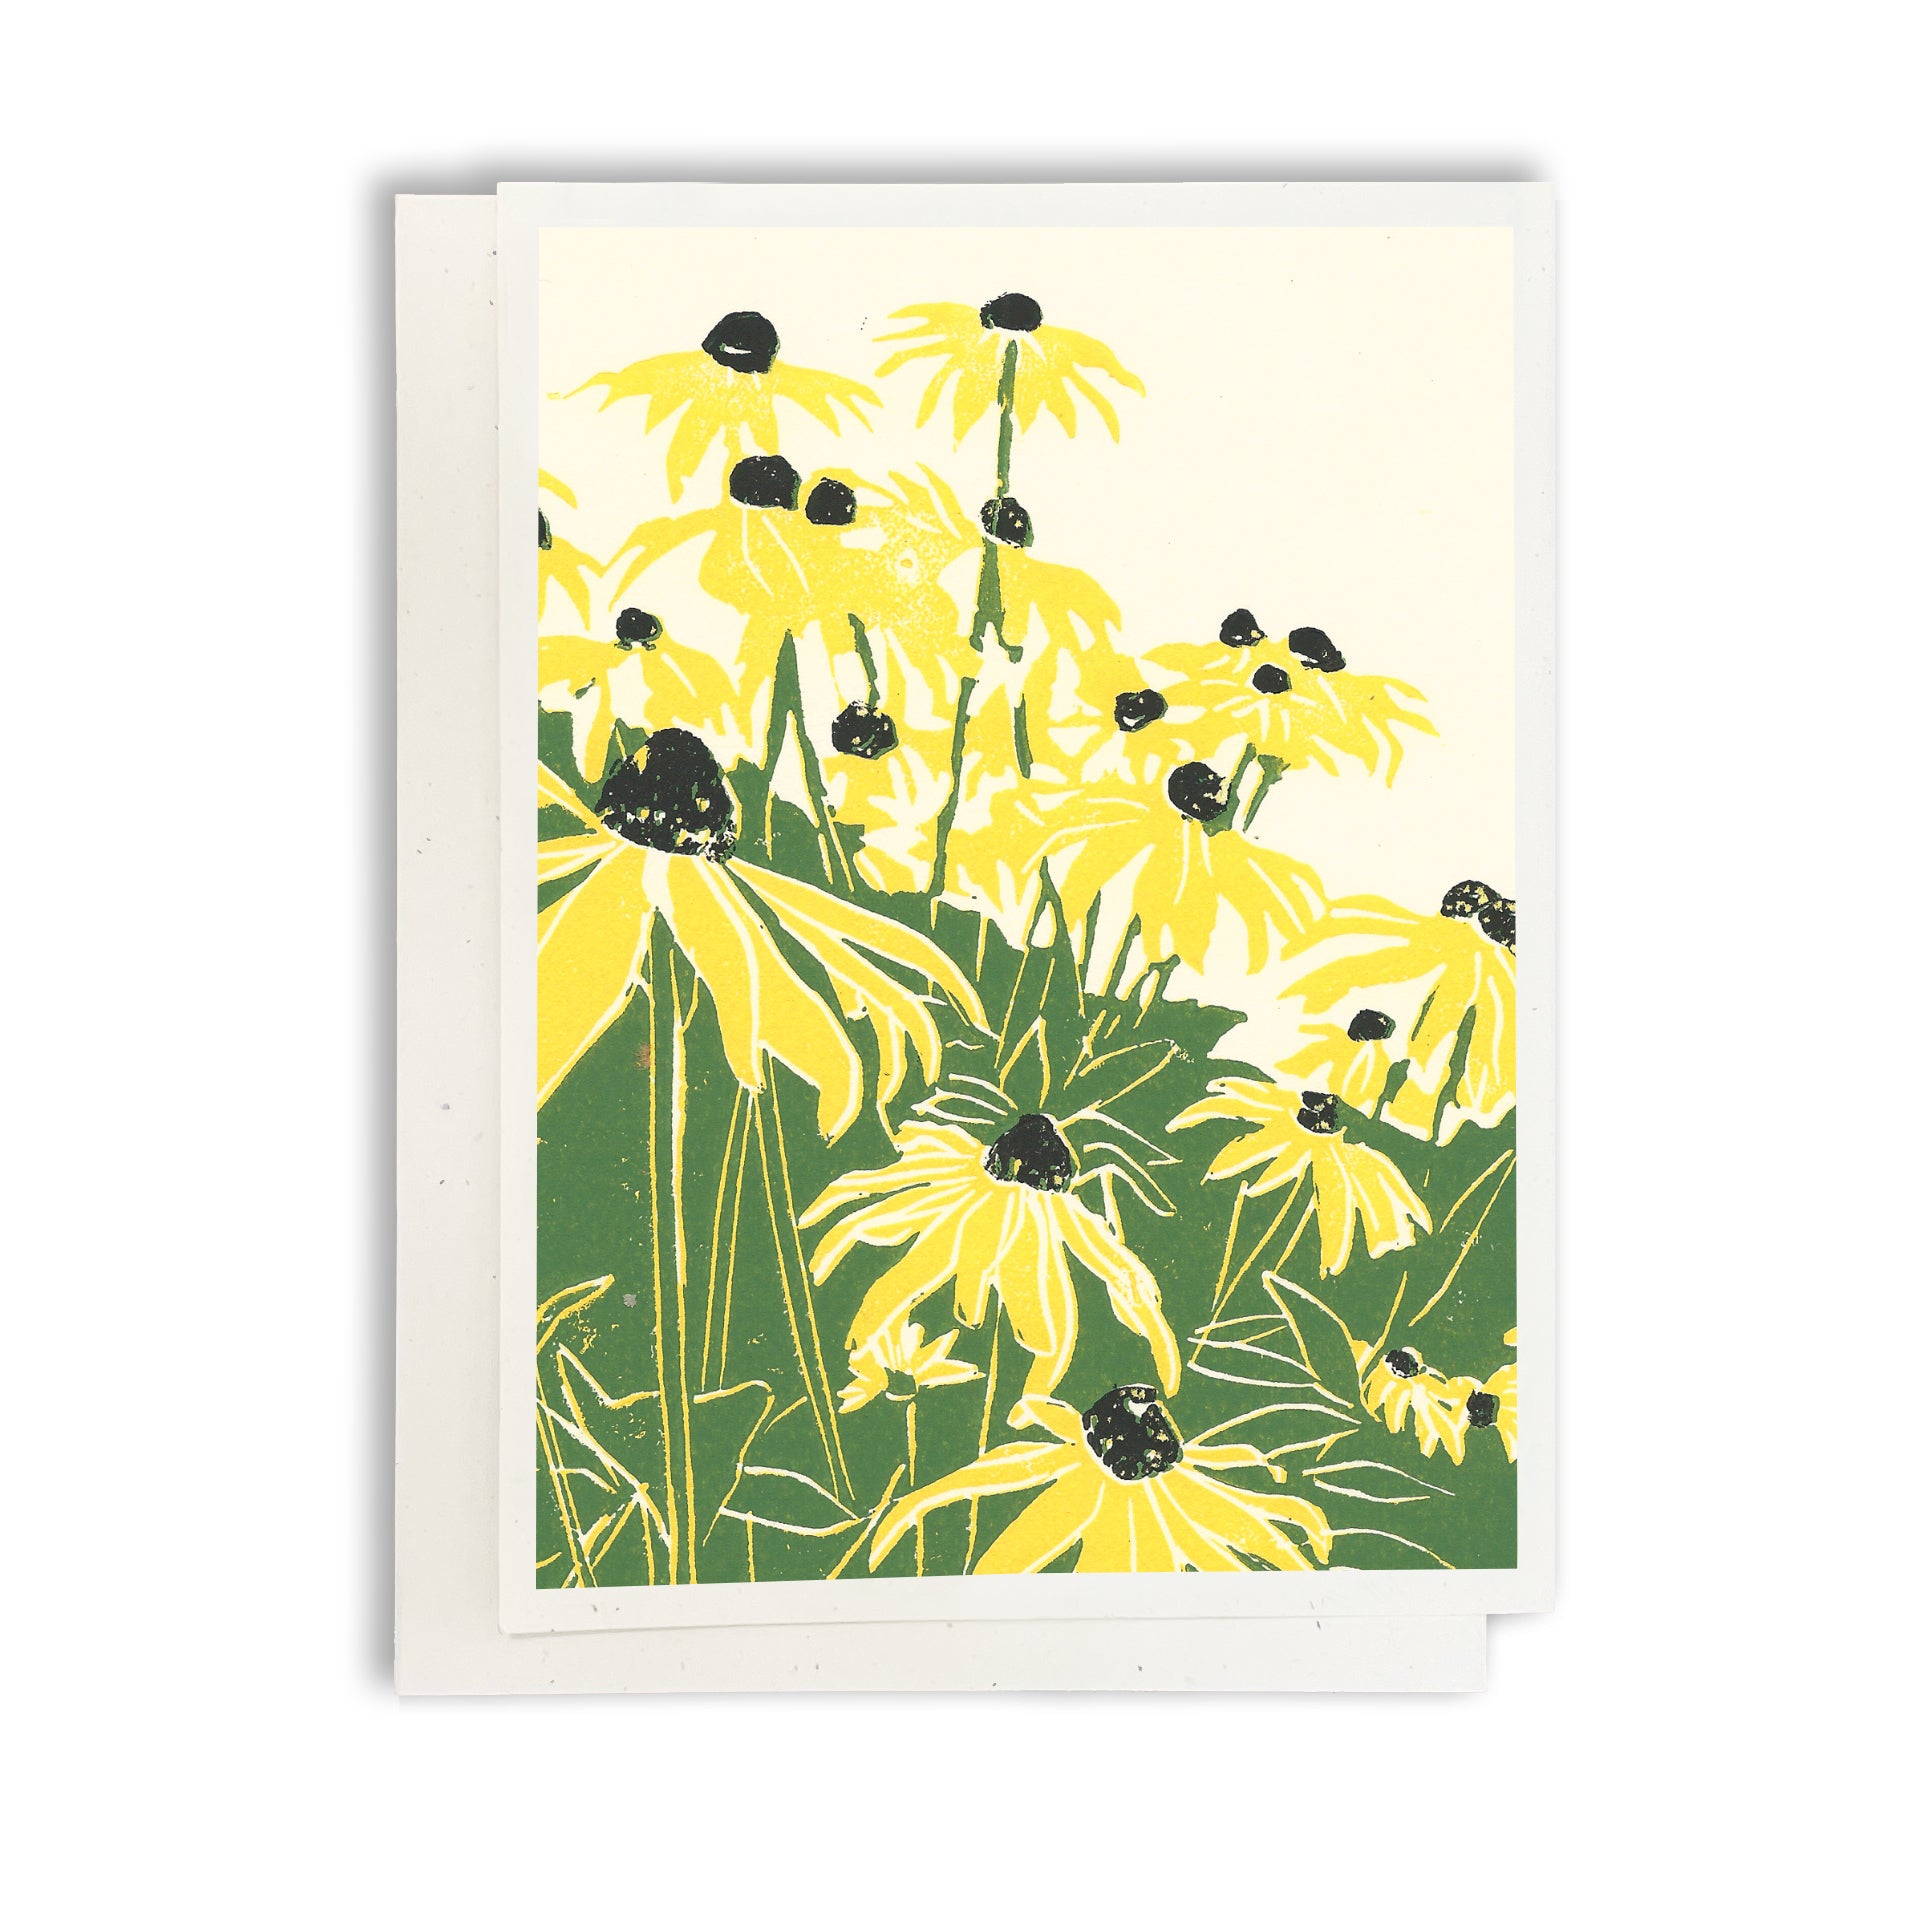 A casually elegant card featuring a digital reproductions of Natalia Wohletz's block print design titled Black Eyed Susans.